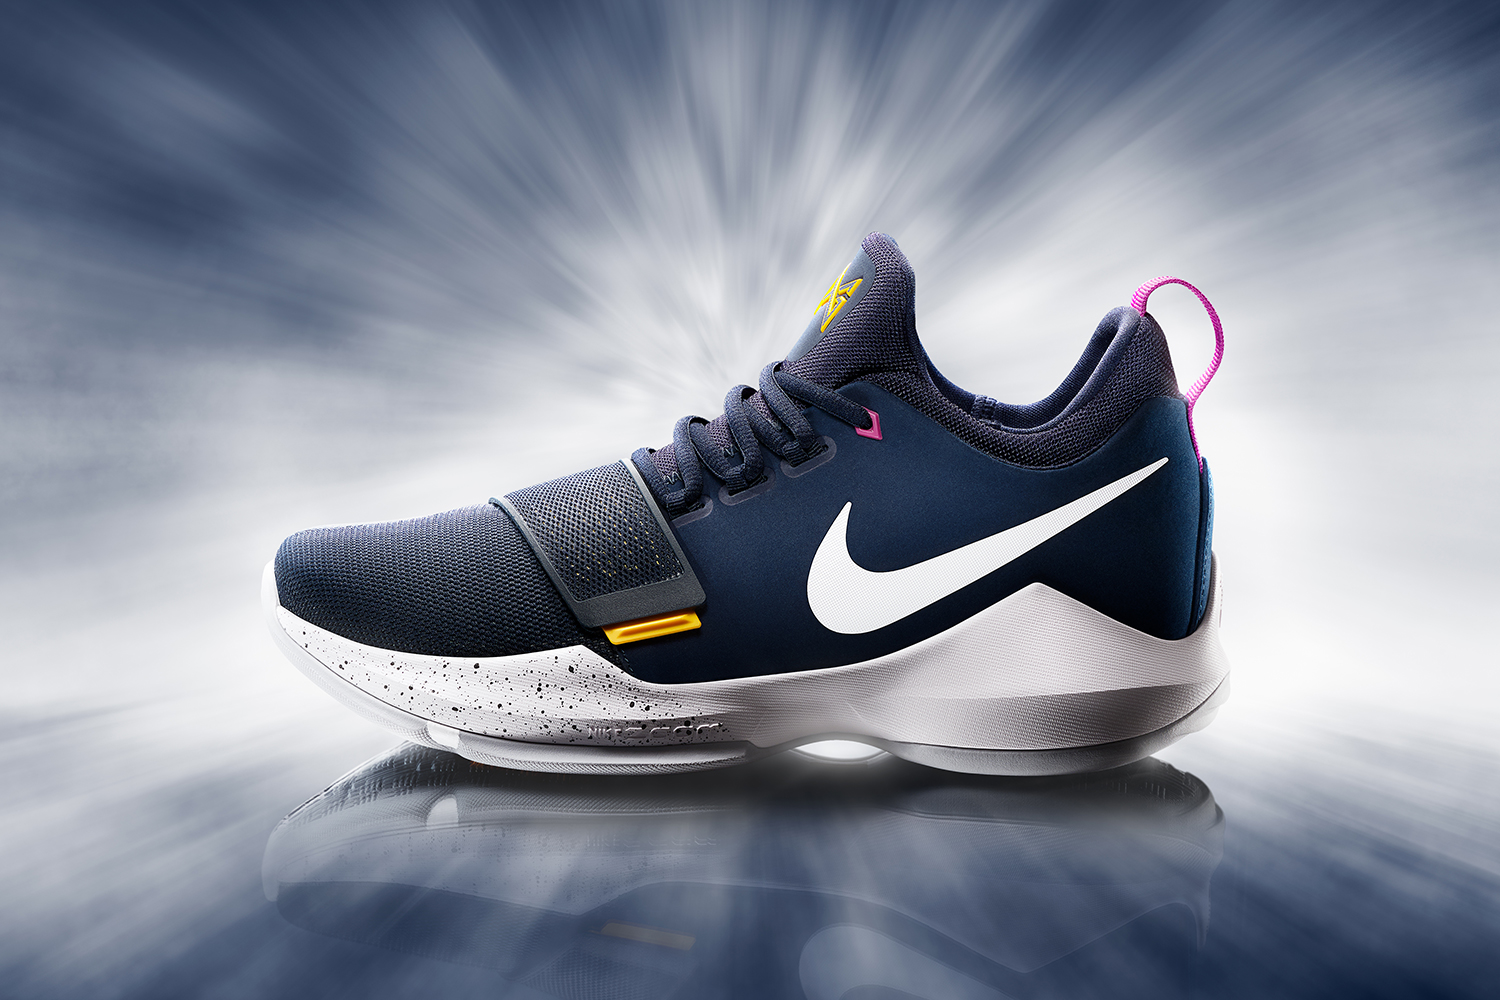 Close-up of shoes exclusively for Paul George - Nike PG1